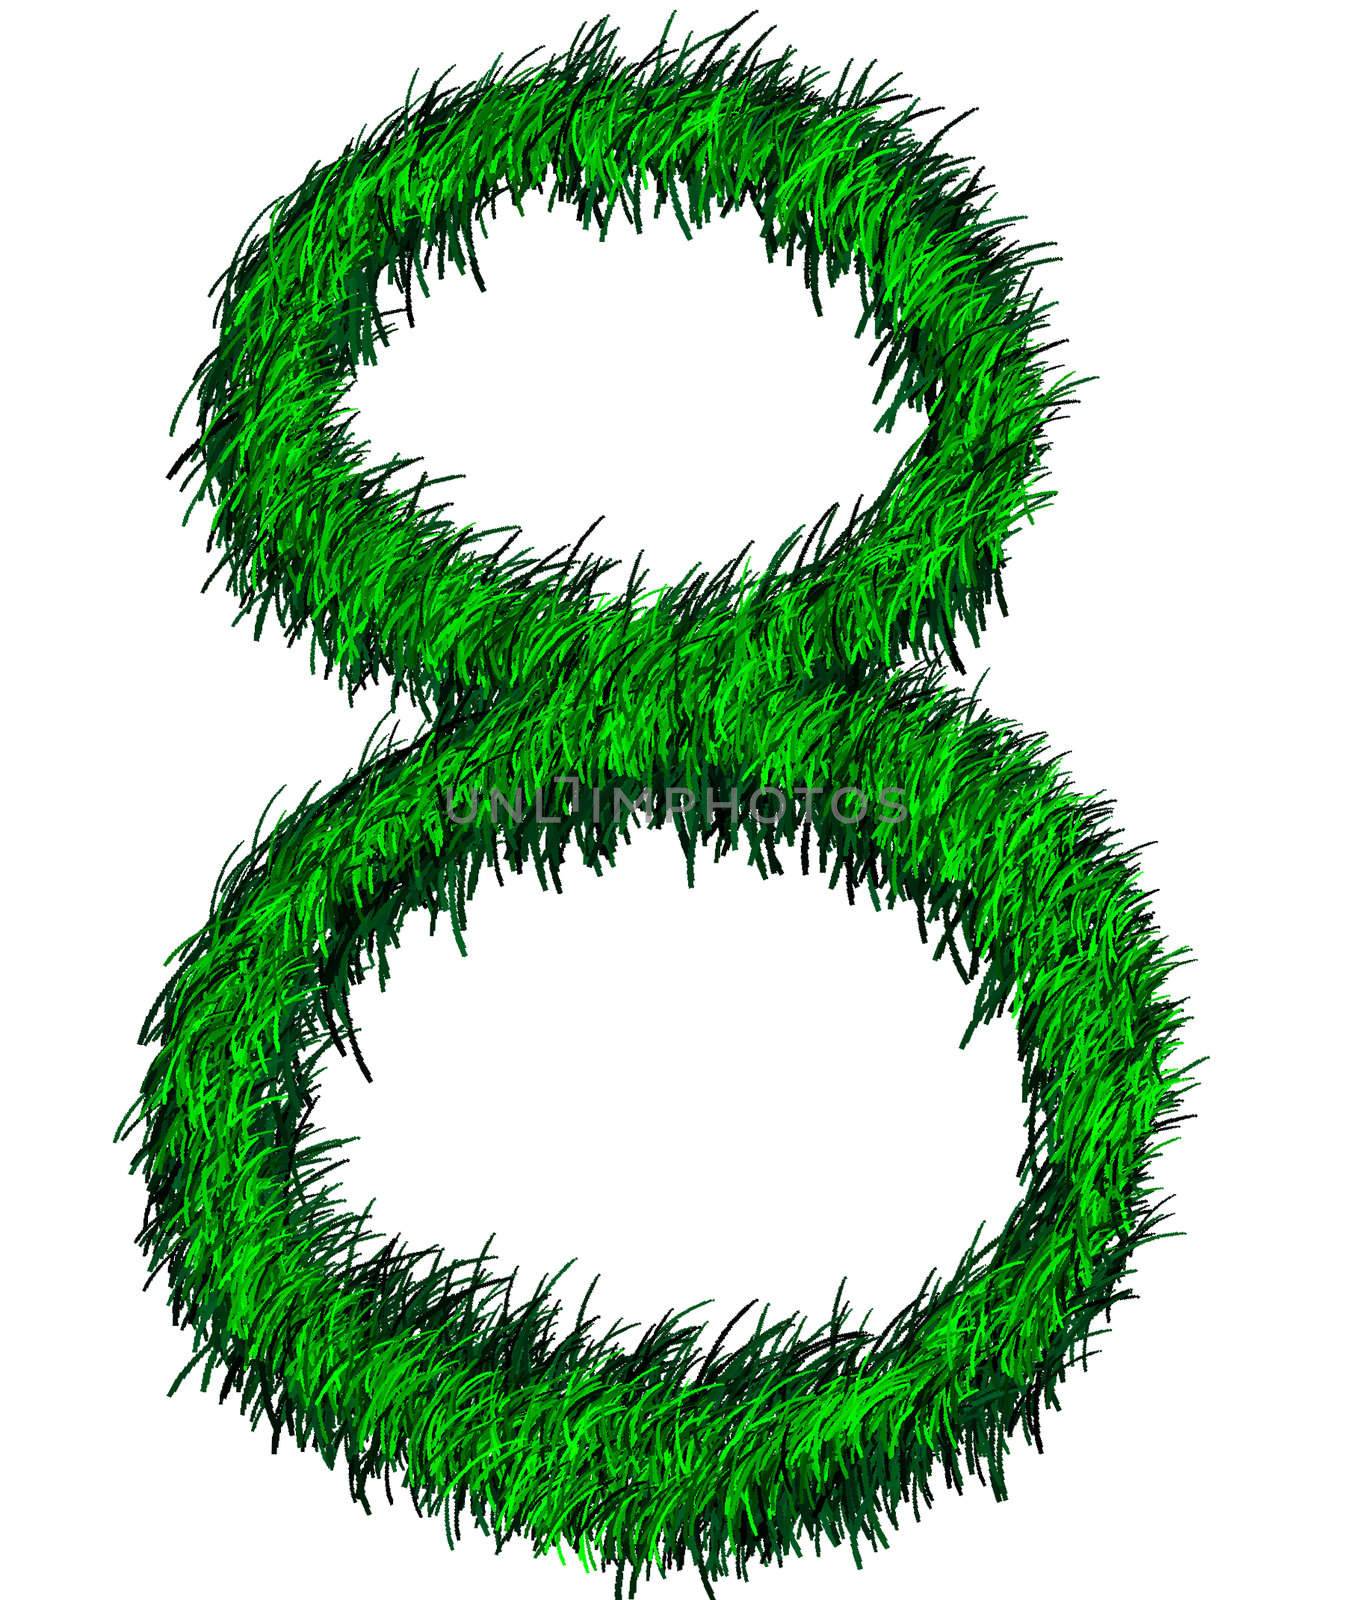 Computer graphic as one numeric of green grass.